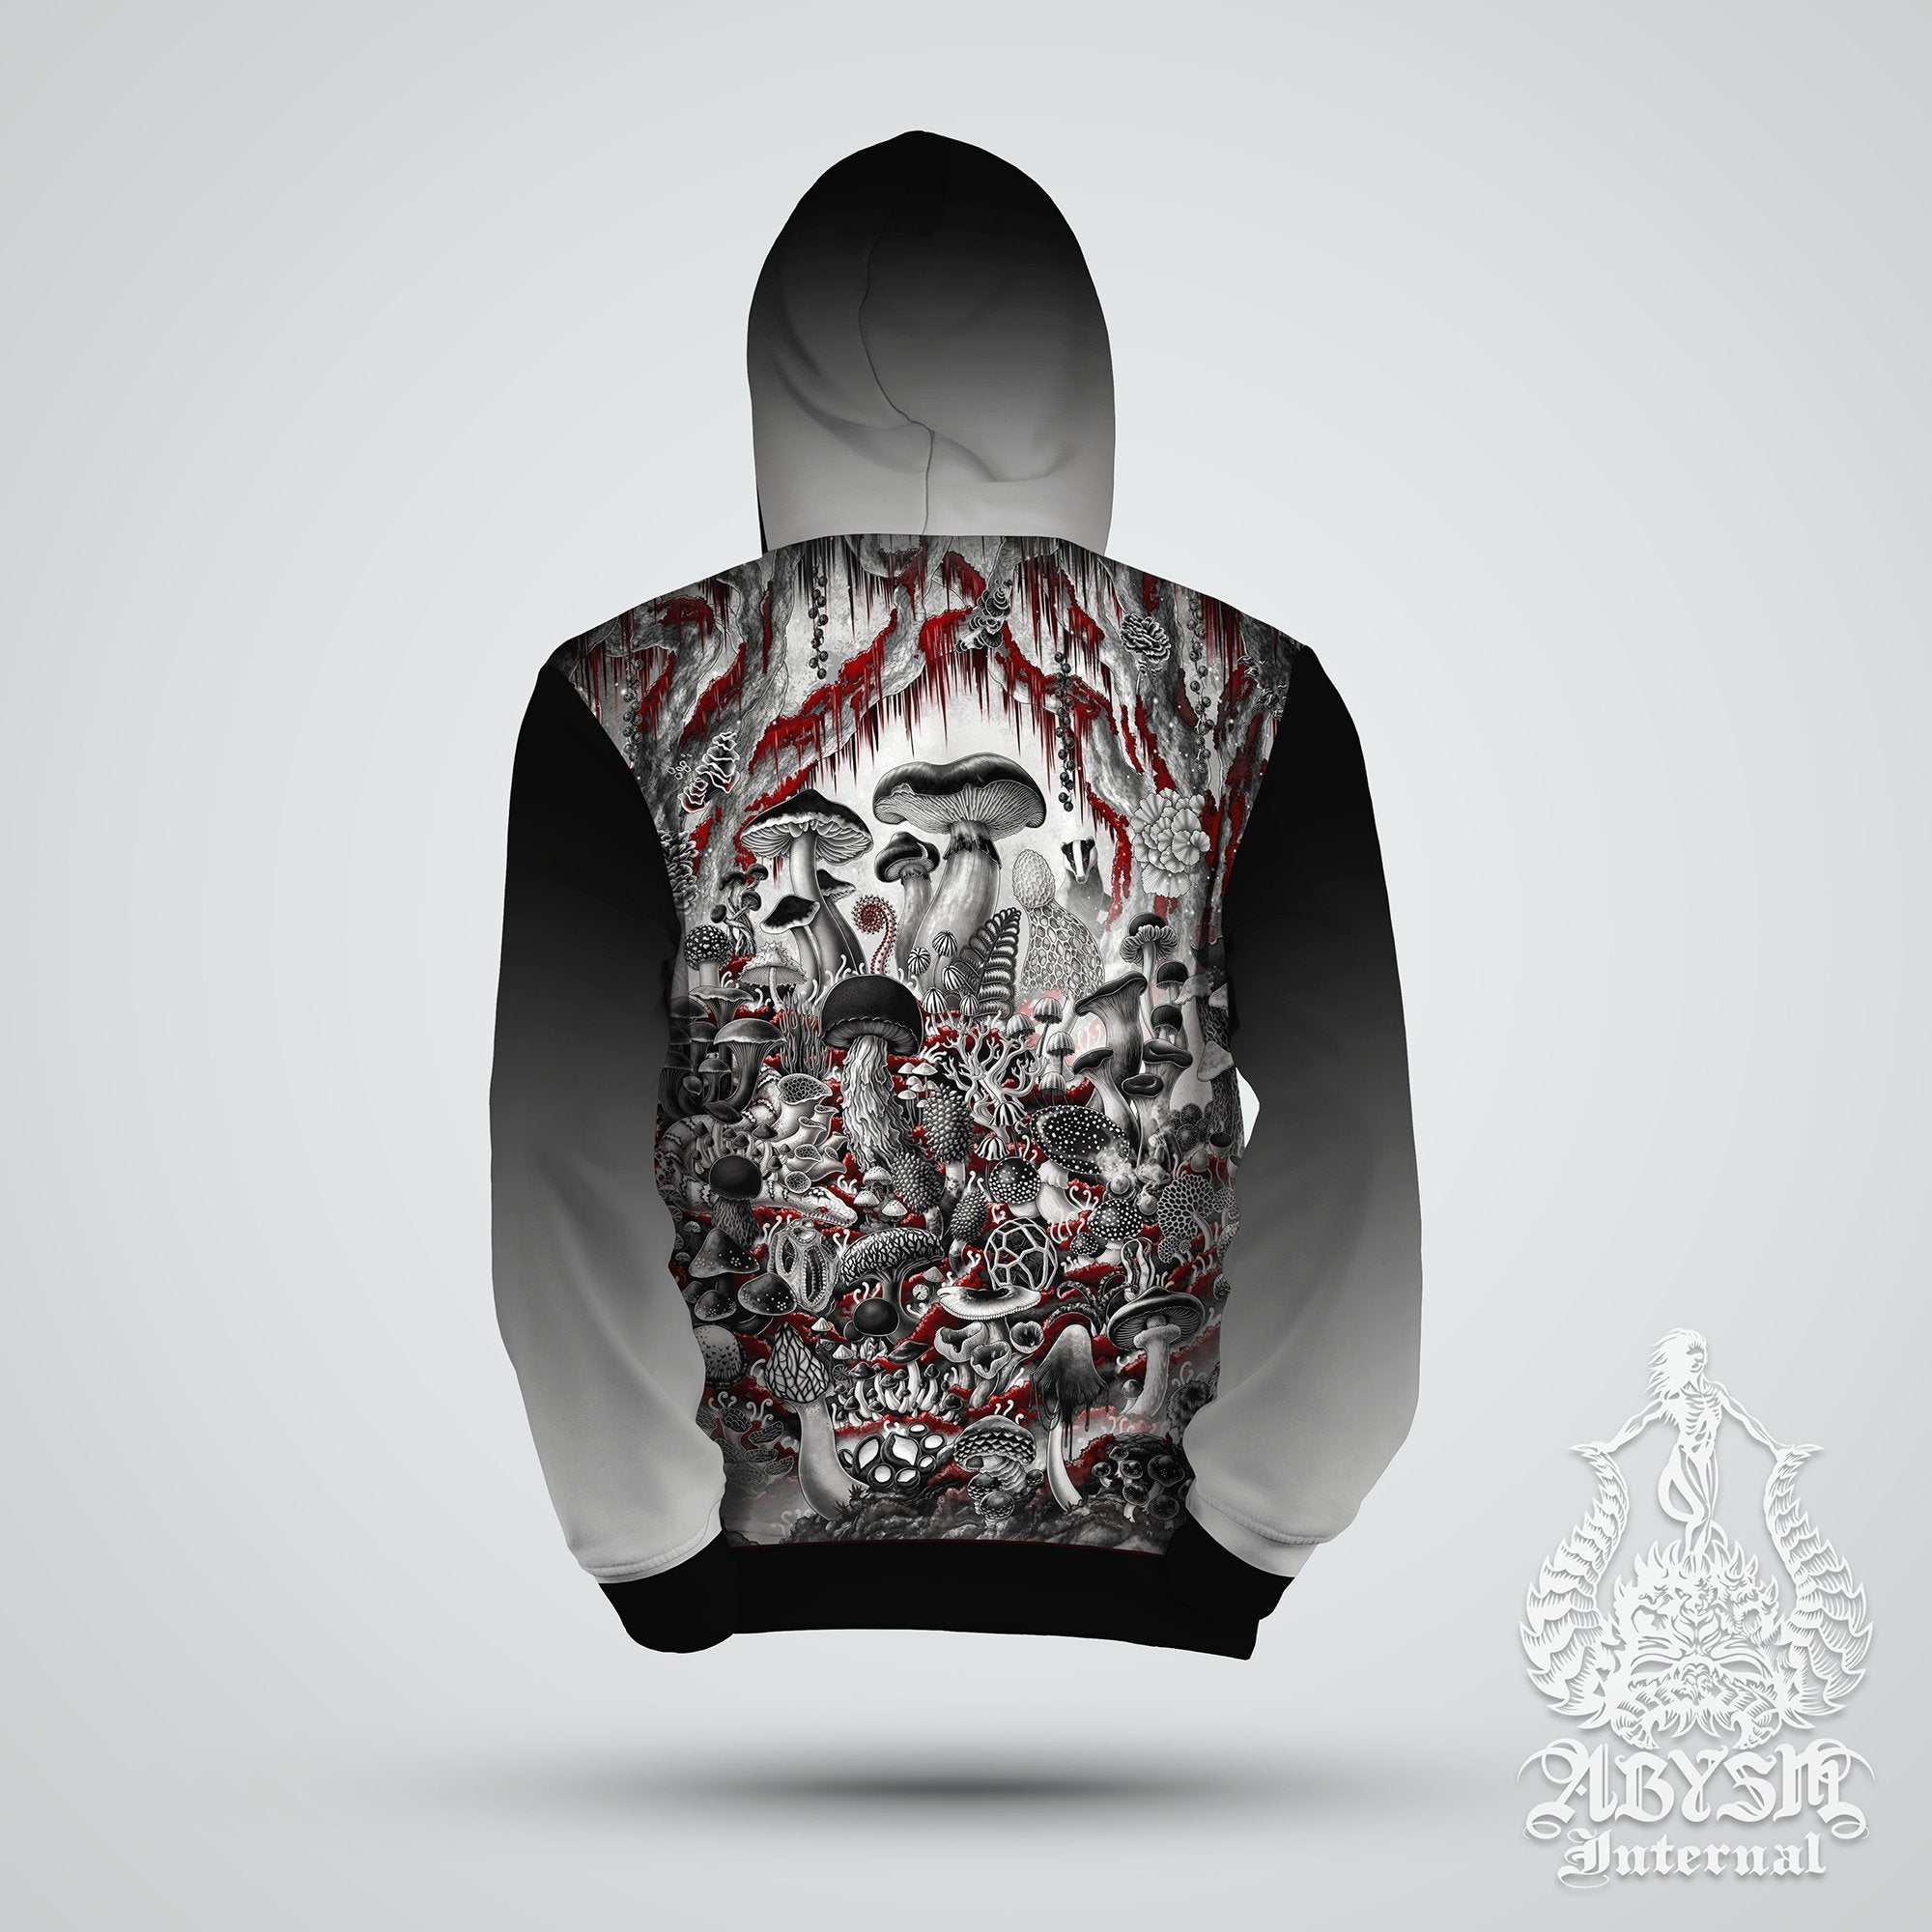 Mushrooms Hoodie, Gothic Outfit, White Goth Festival Streetwear, Alternative Clothing, Unisex, Biology Teacher and Mycologist Gift - Black - Abysm Internal